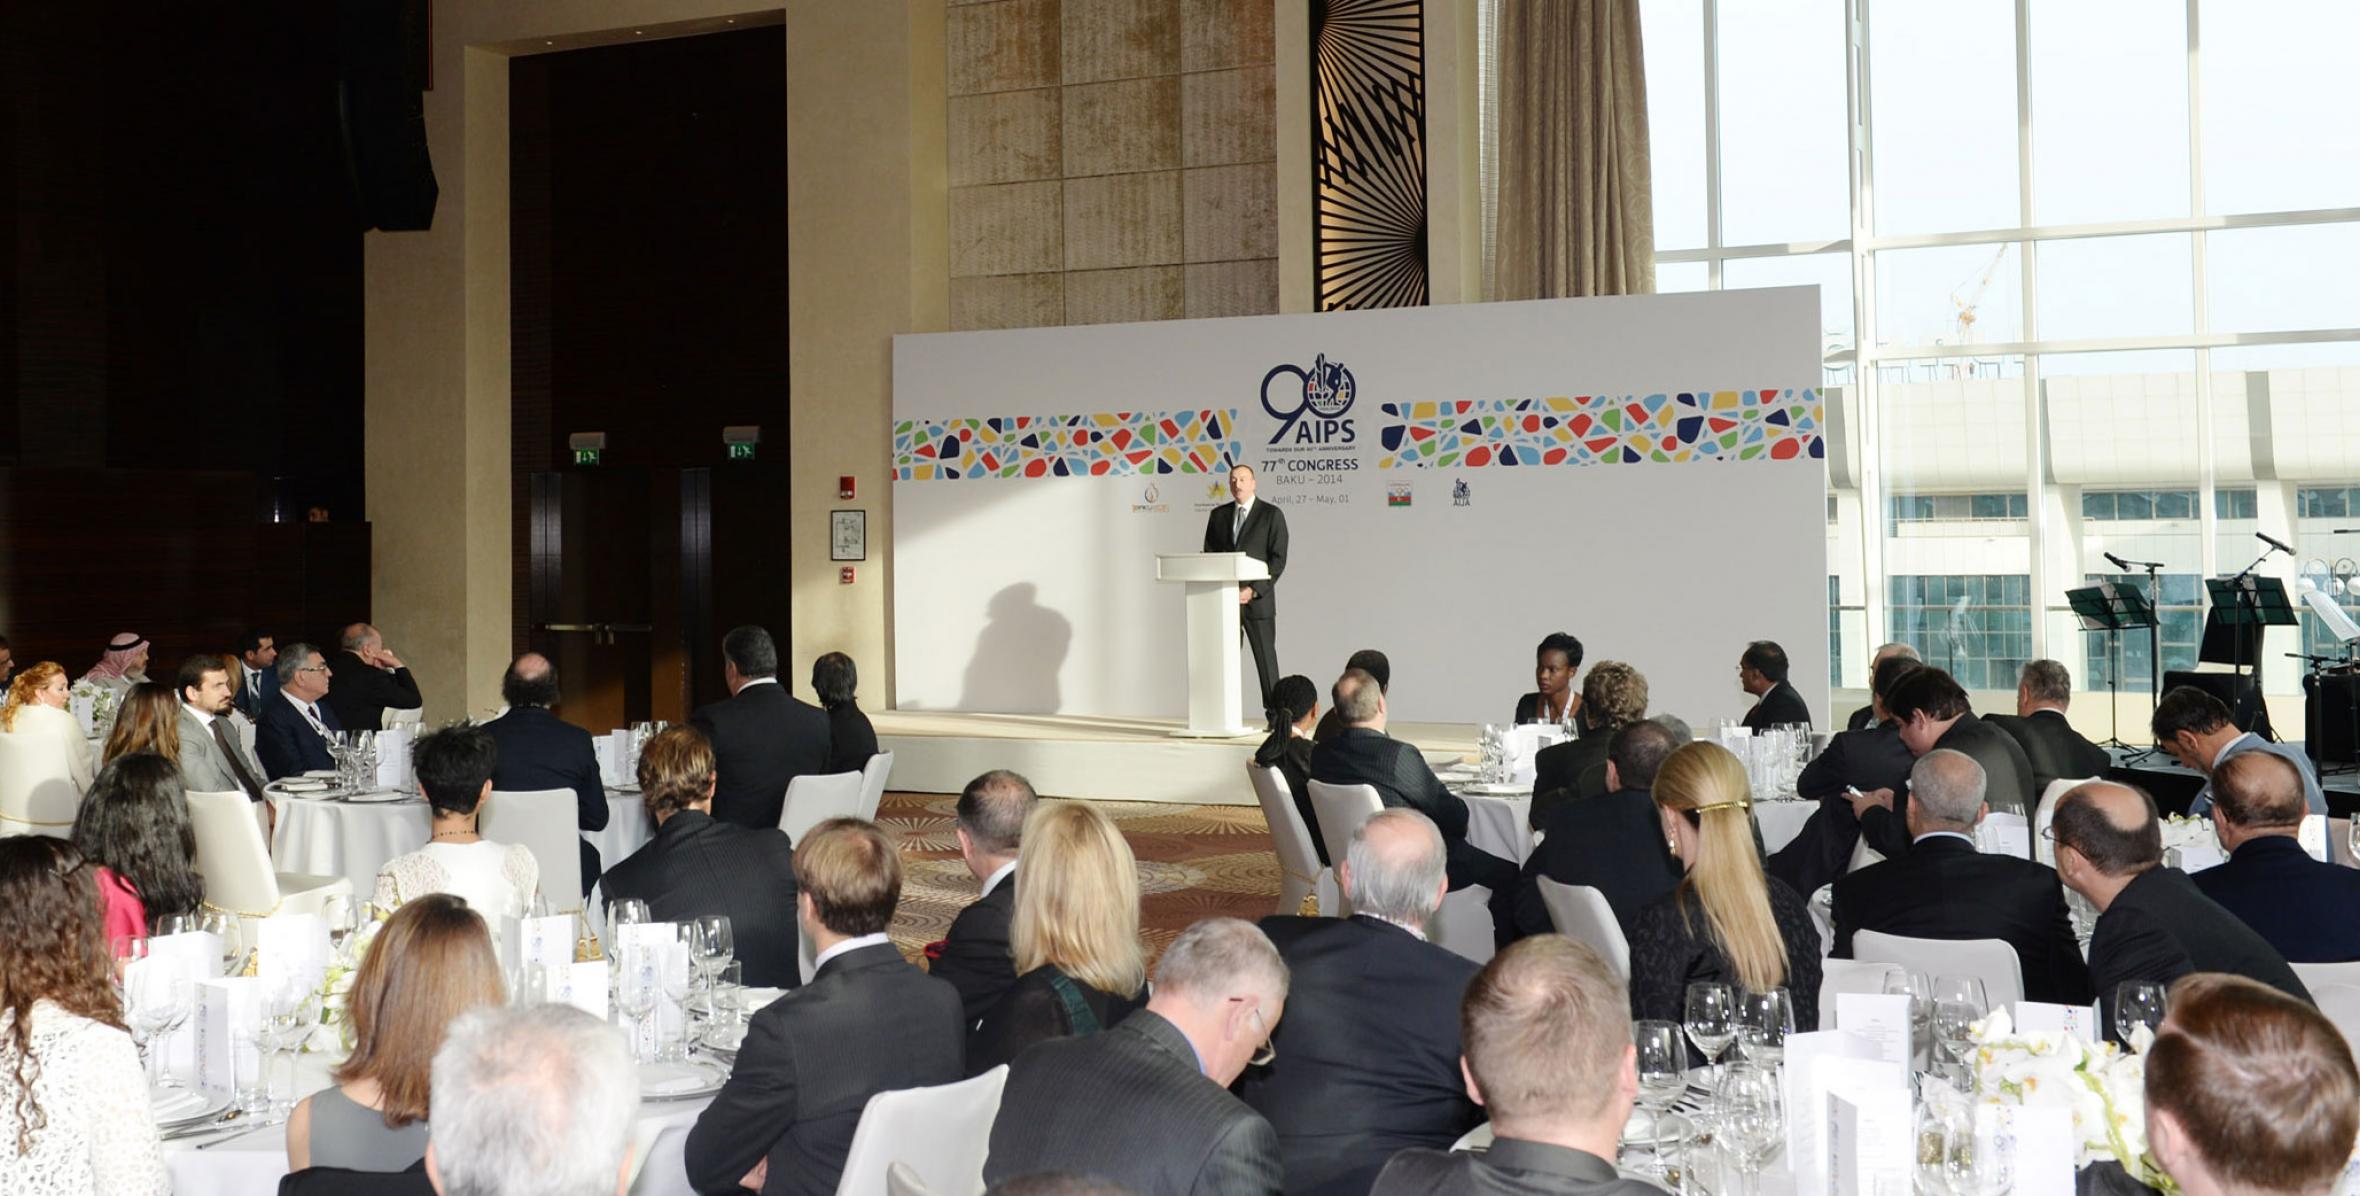 Speech by Ilham Aliyev at the dinner reception given in honor of participants of the 77th Congress of the International Sport Press Association